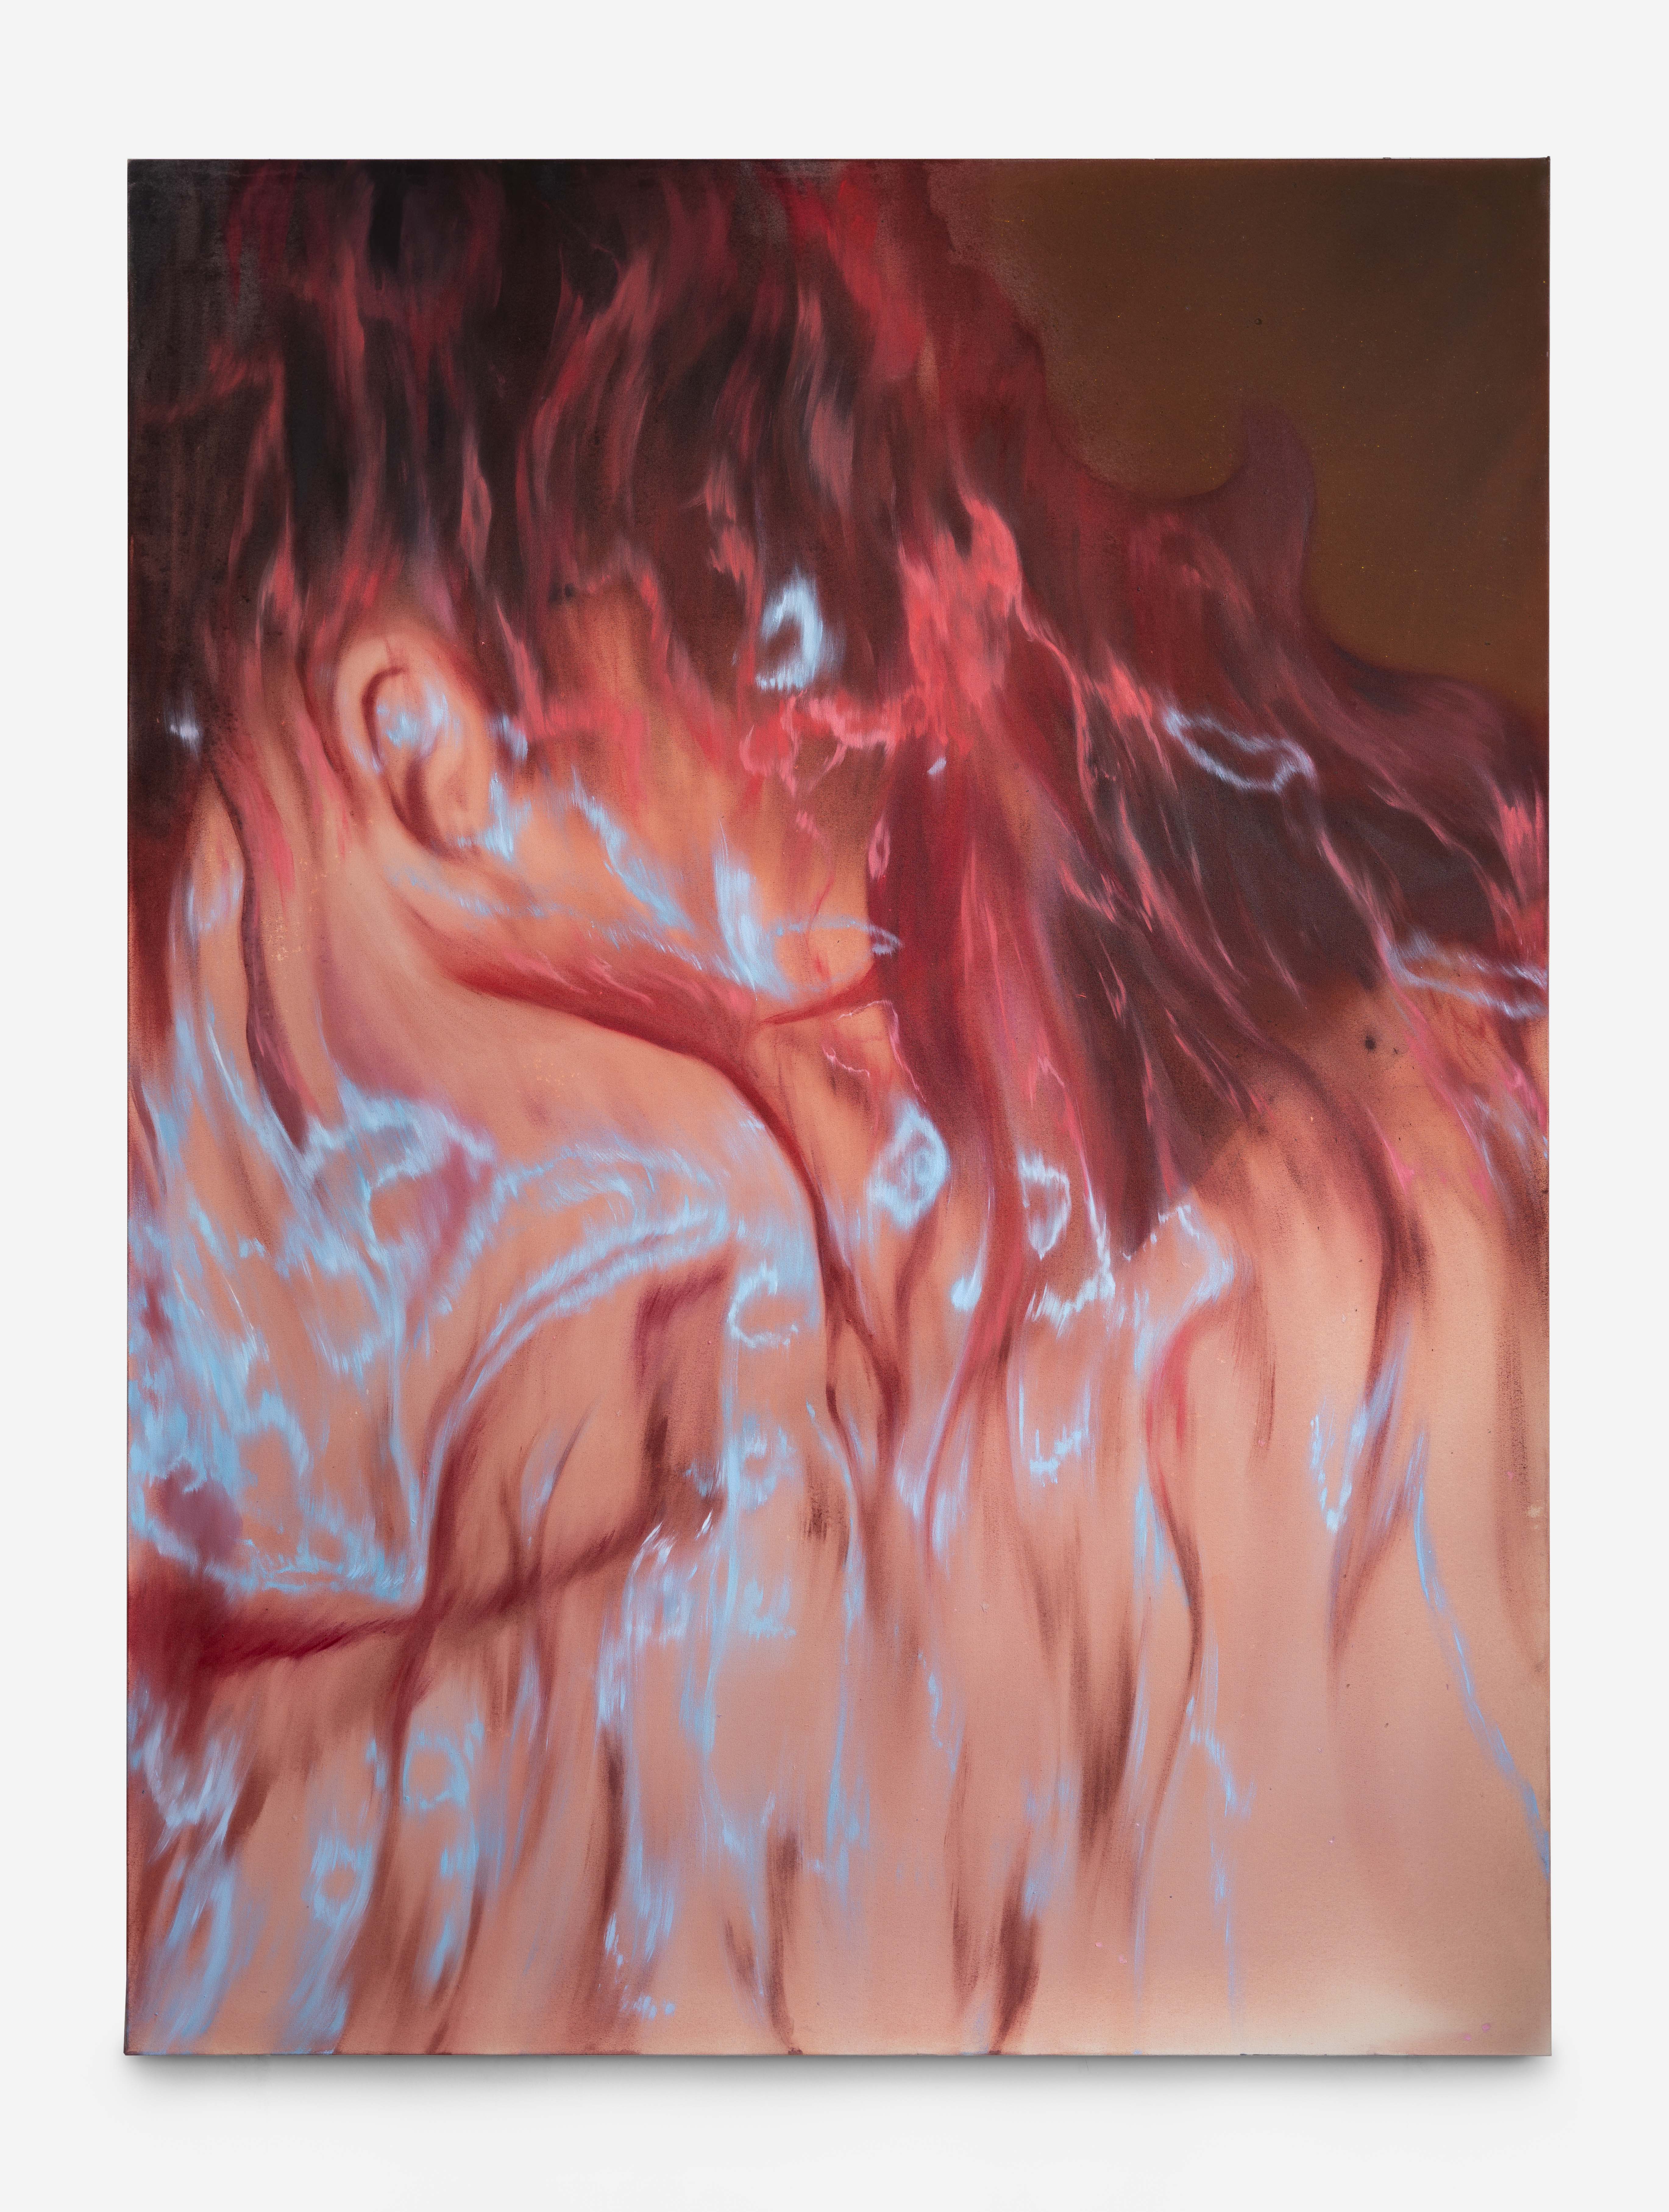 Burning shadow 燃烧的影子  150 x 200 cm pigment,oil on canvas - 副本